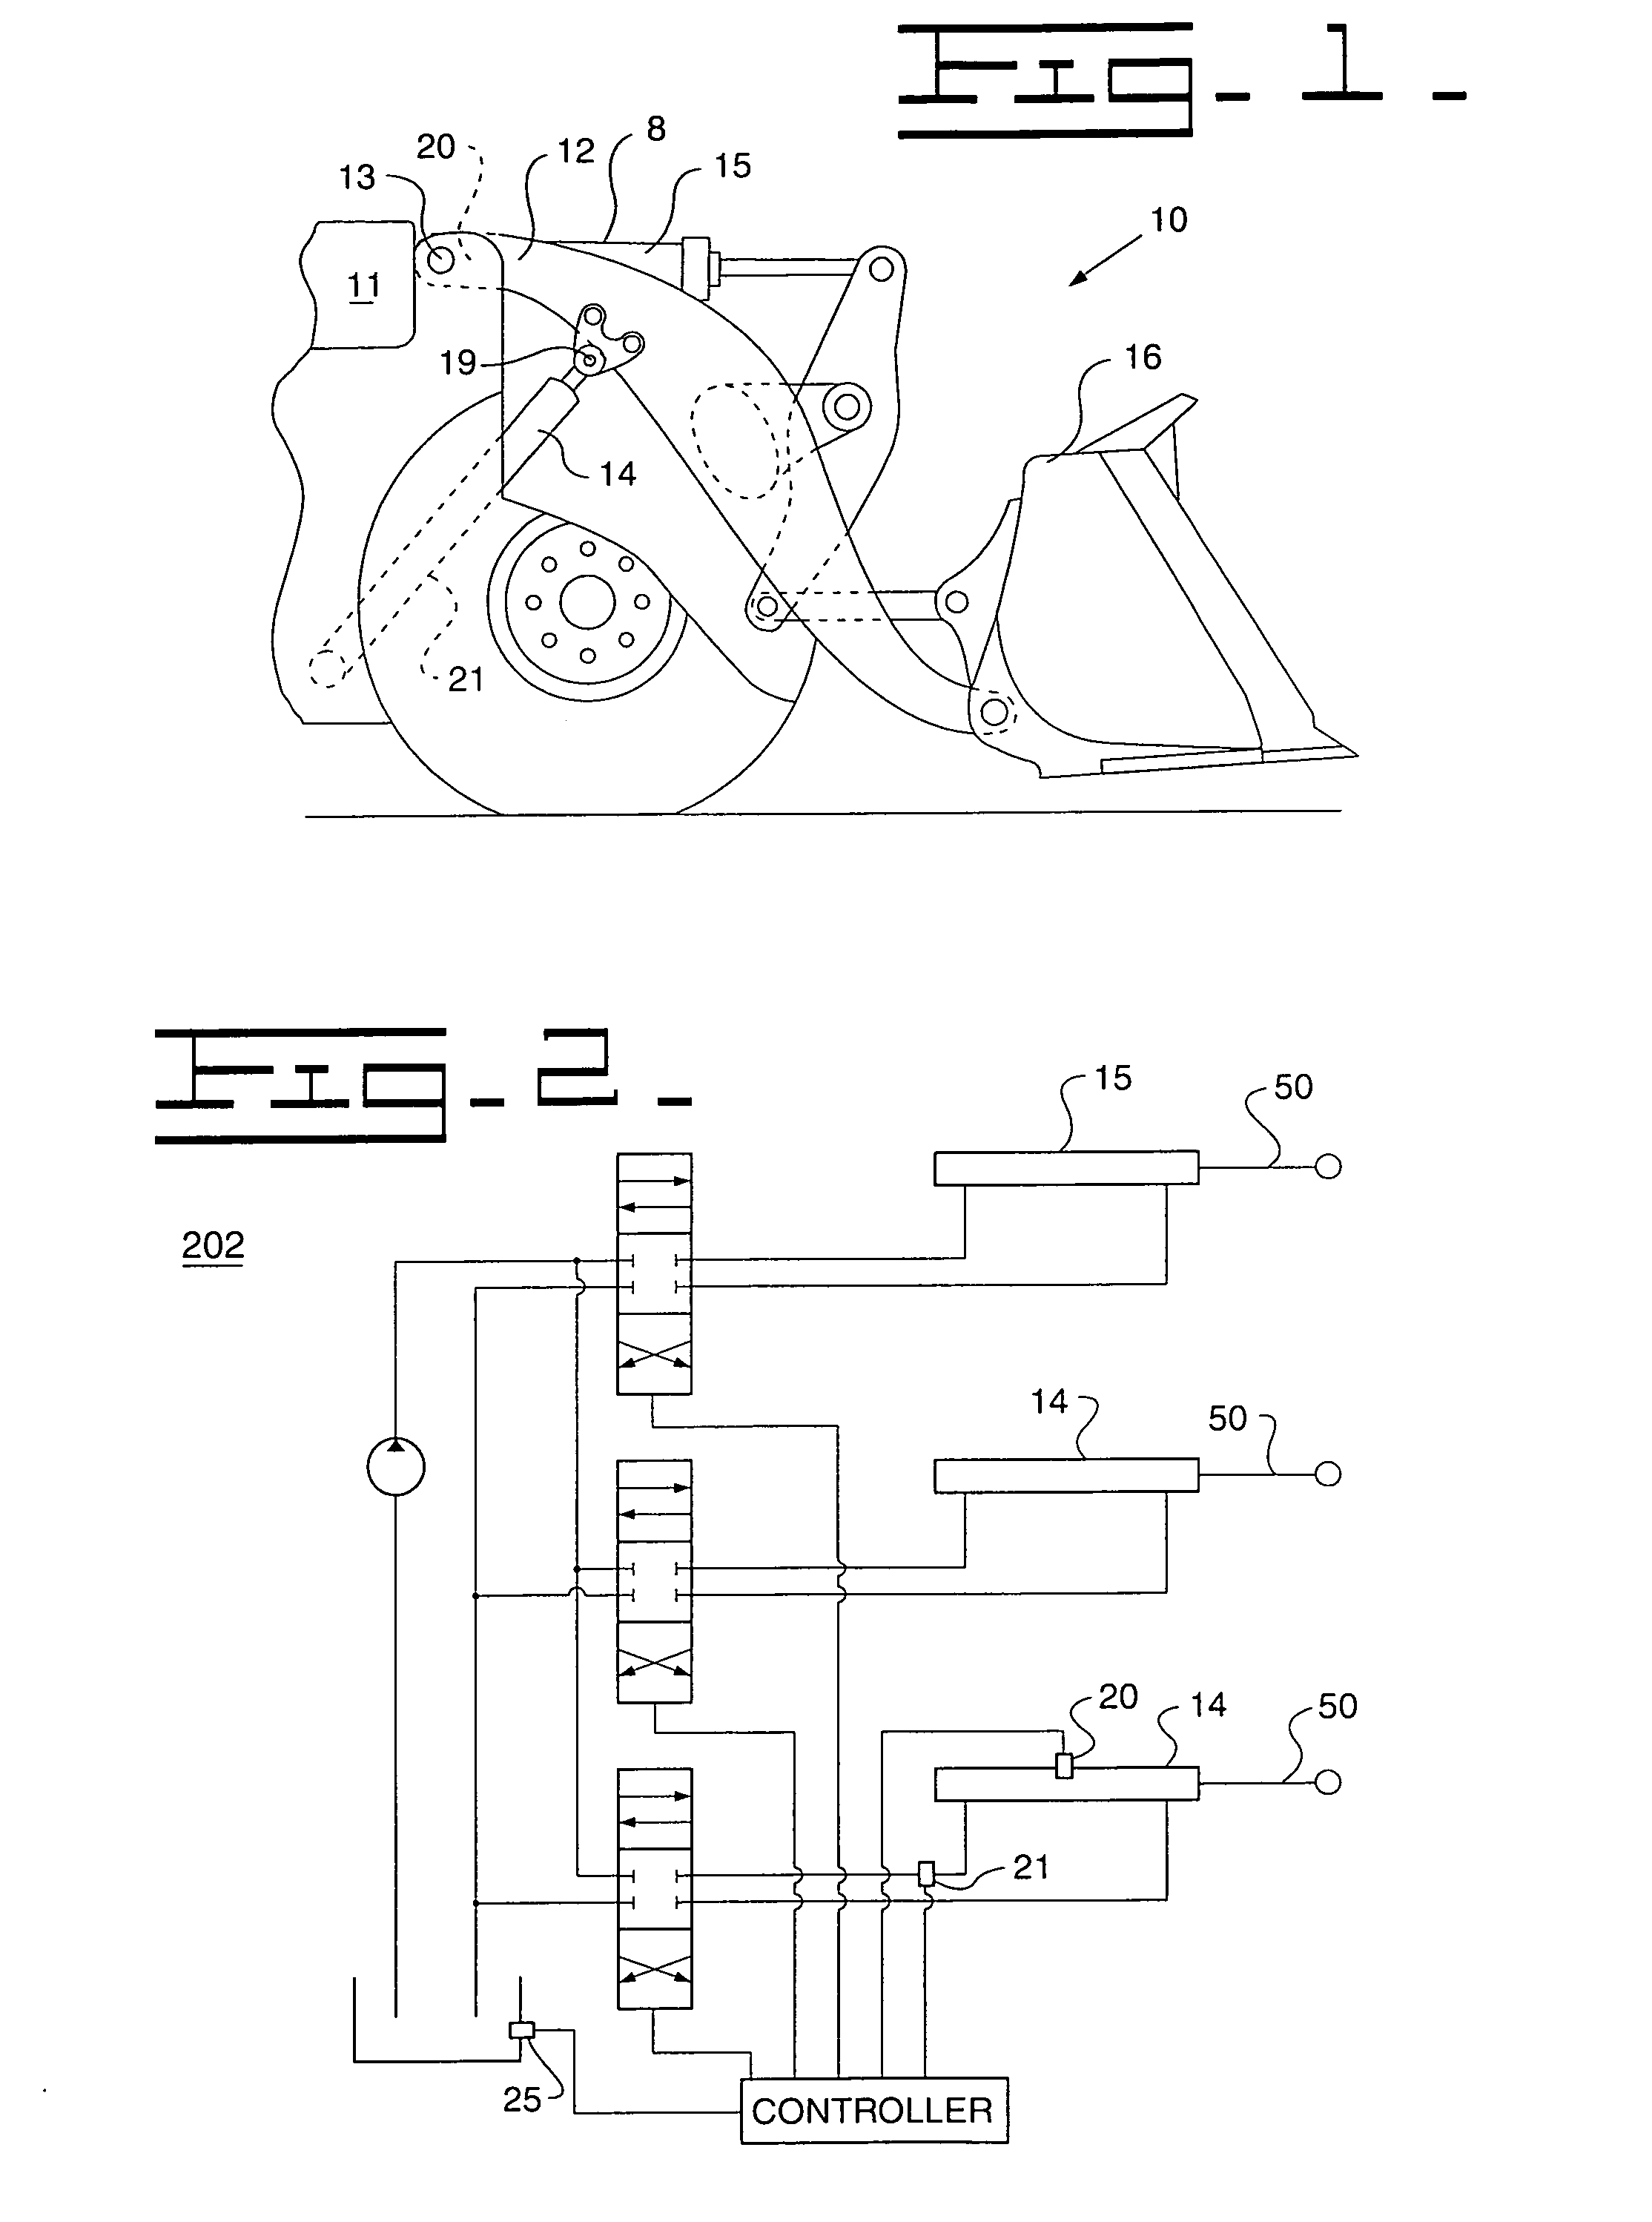 Method and apparatus for performing temperature compensation for a payload measurement system